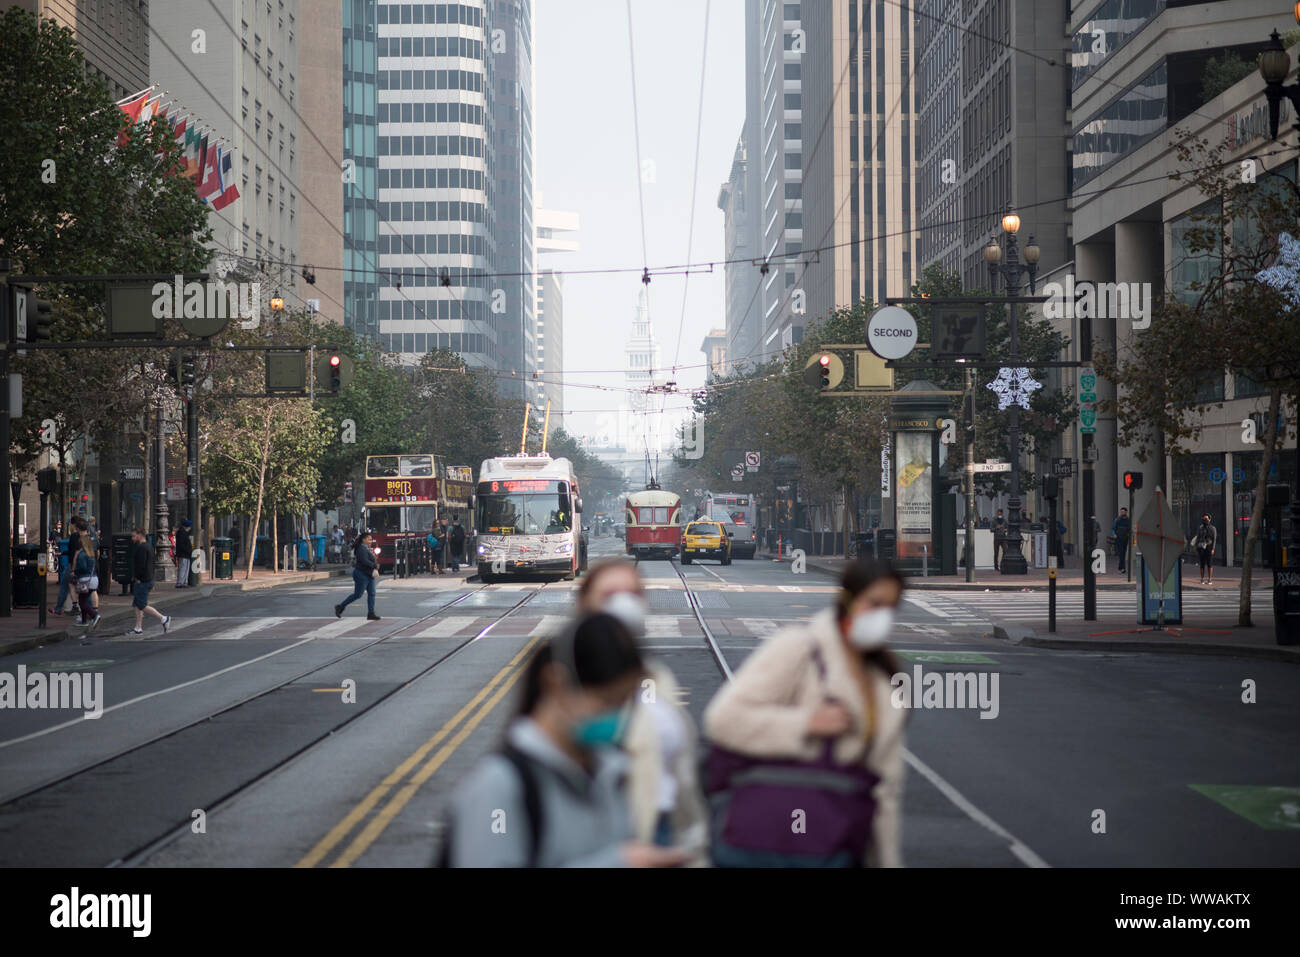 San Francisco, California - November 17, 2018: San Francisco’s Market Street is inundated with smoke from the Camp Fire in Northern California. Stock Photo